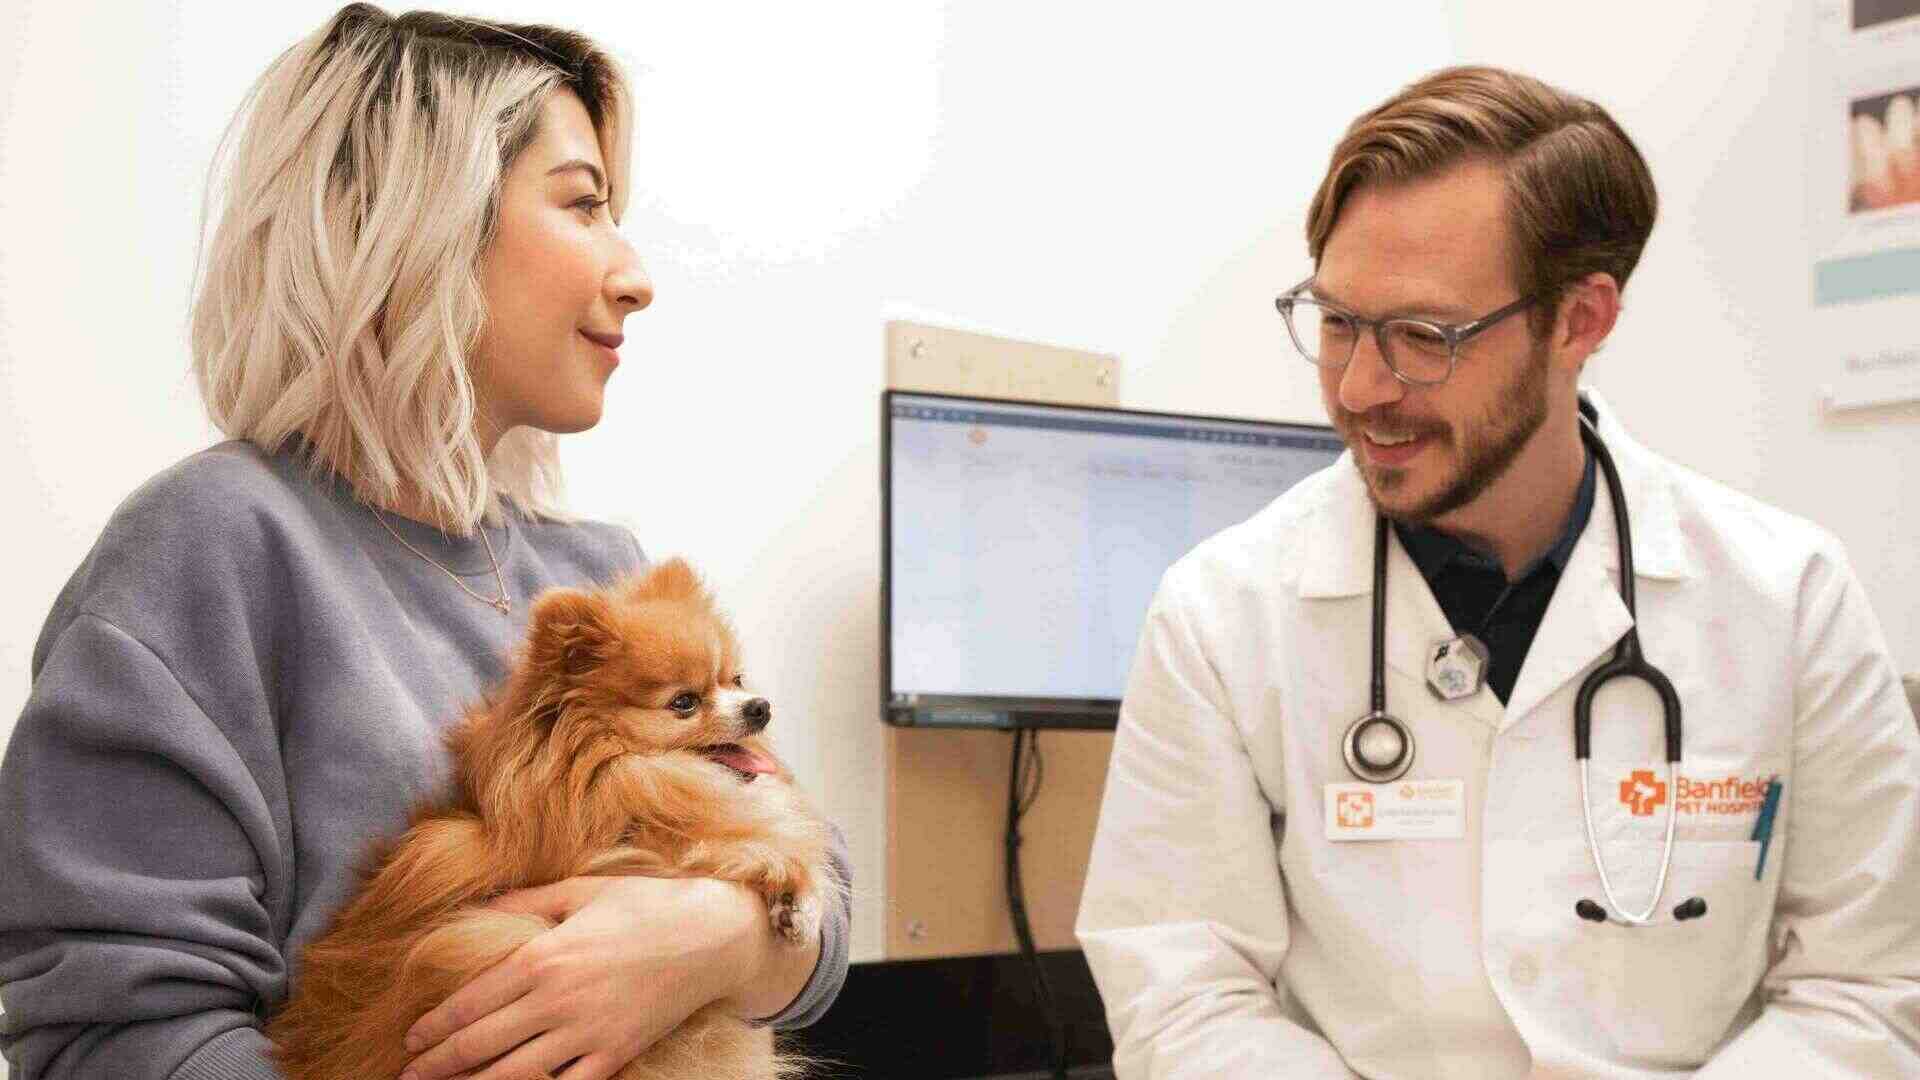 A male veterinarian talking to a puppy while the owner holds it at the Banfield Pet Hospital